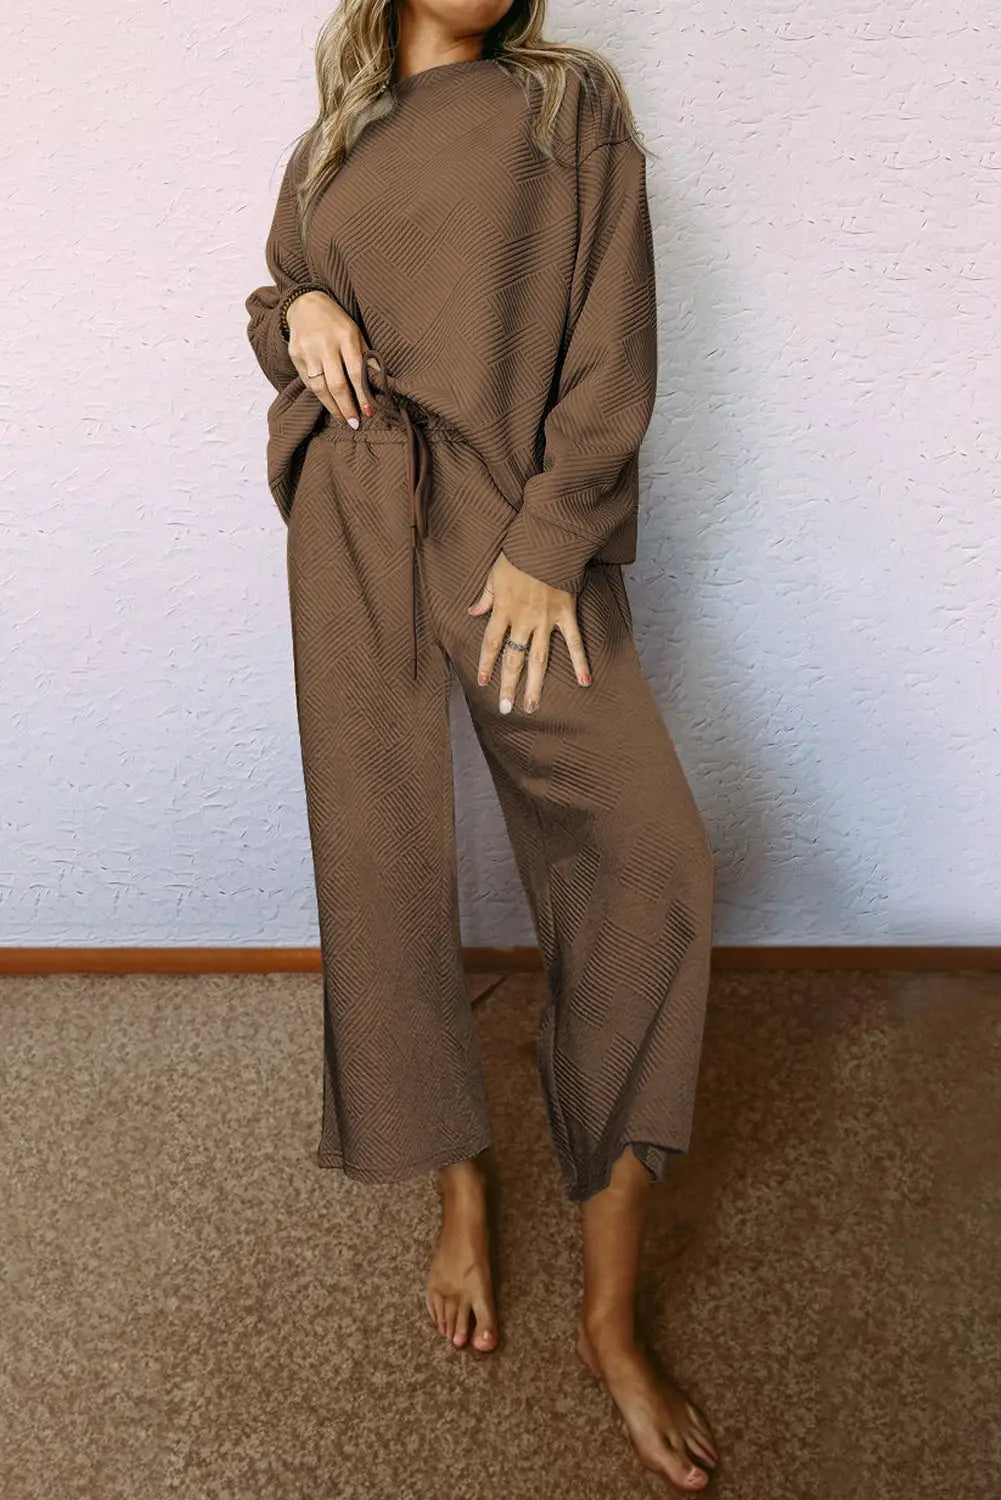 Dark brown ultra loose textured 2pcs slouchy outfit - 2xl 95% polyester + 5% elastane pants sets